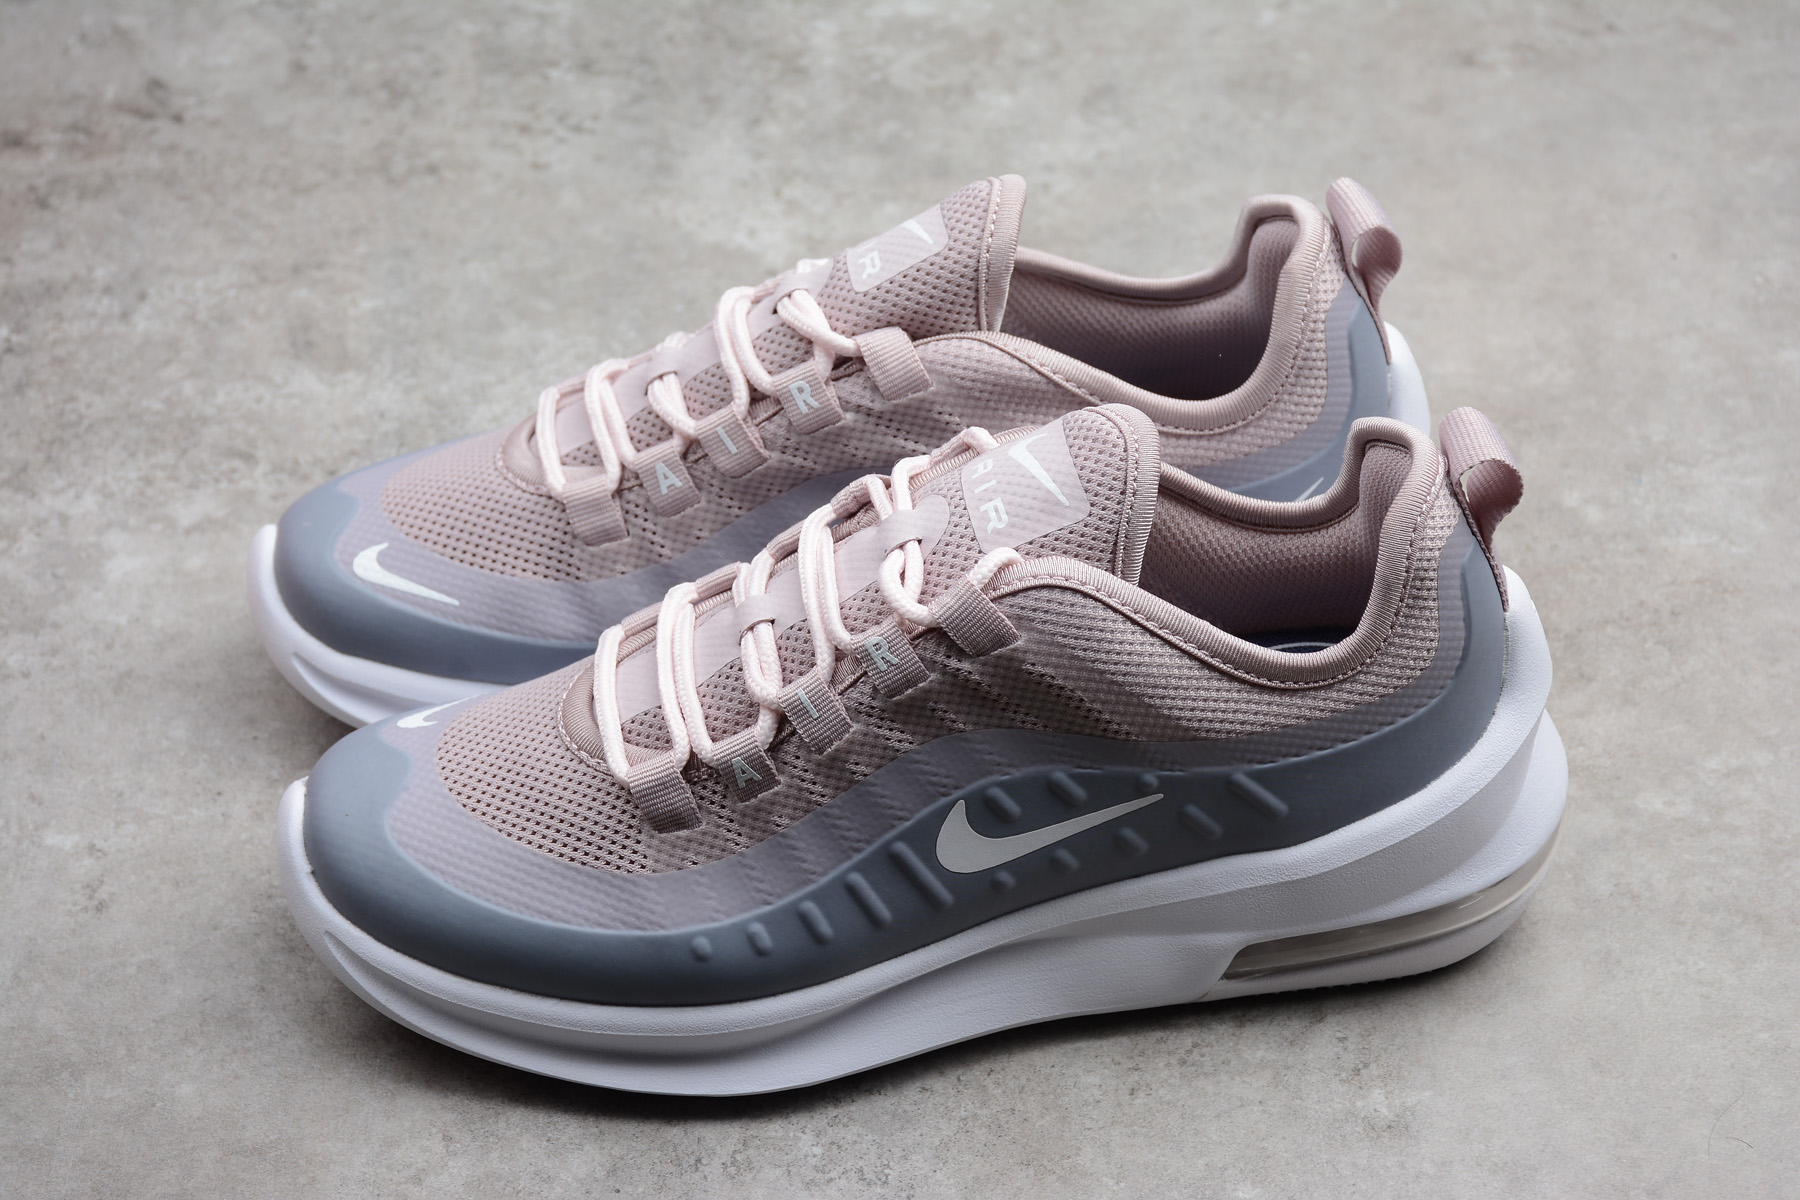 Women's Nike Air Max Axis Particle Rose/White Running